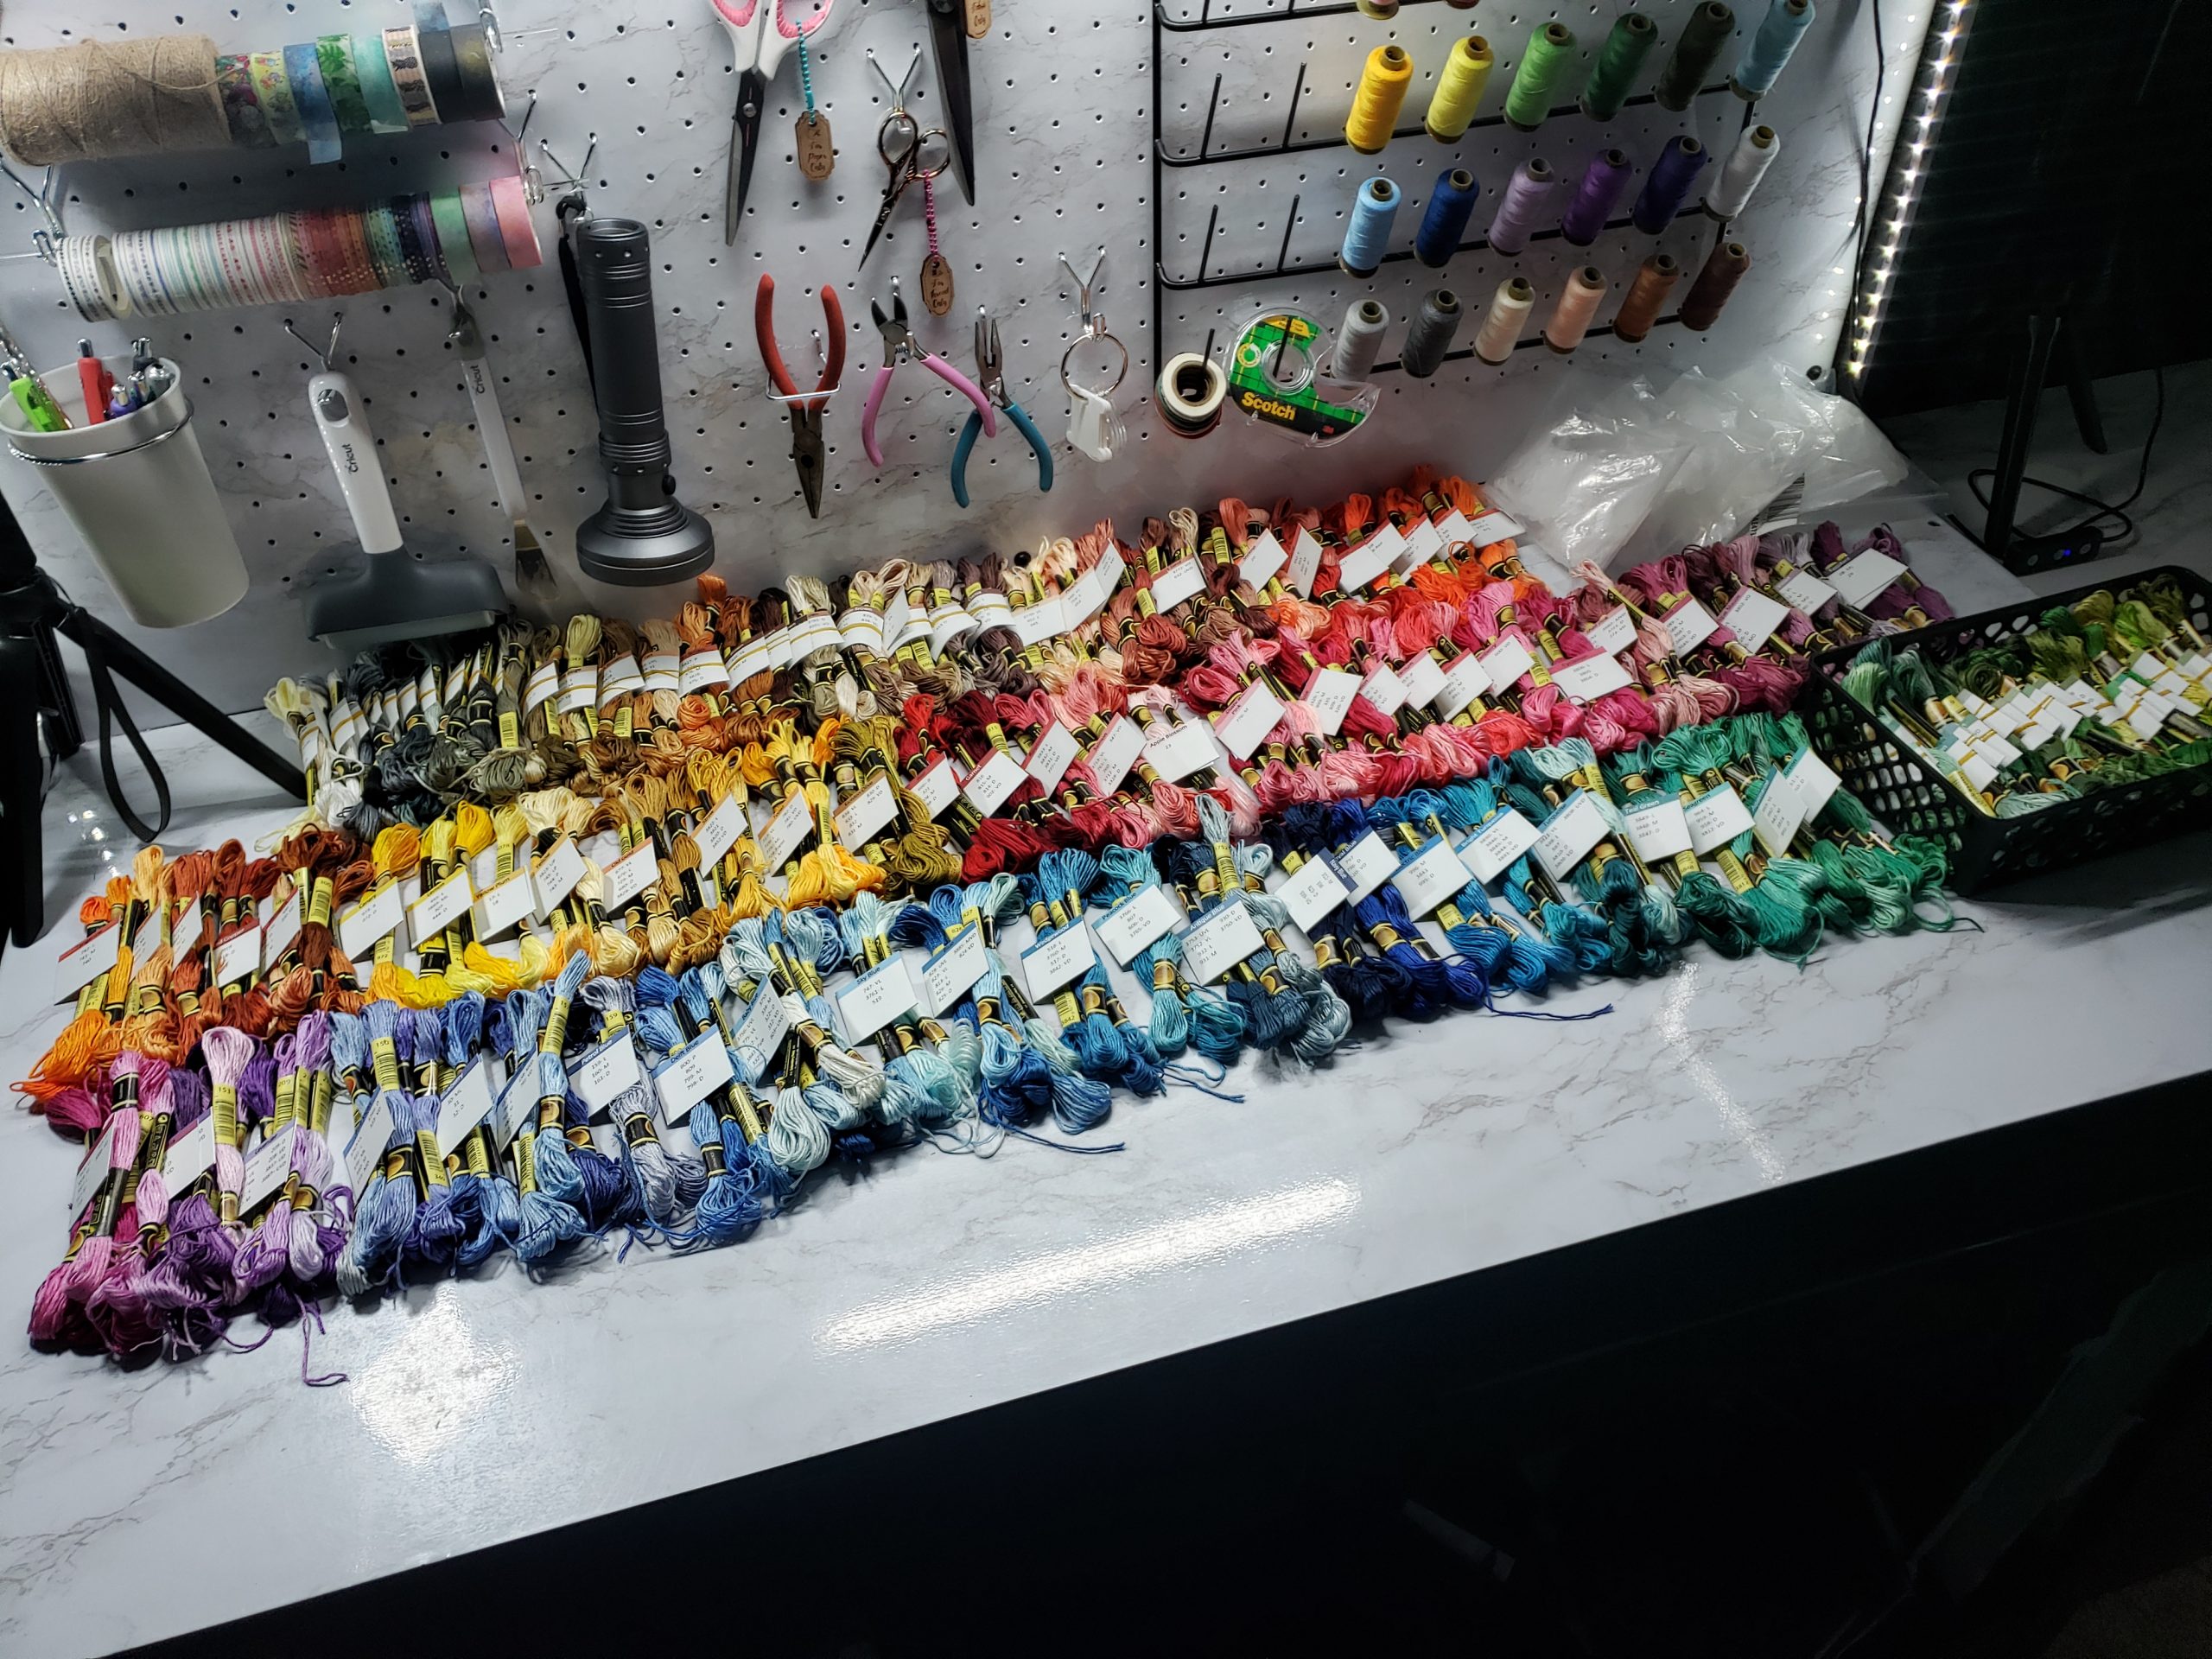 A full set of CXC floss, sorted by color.